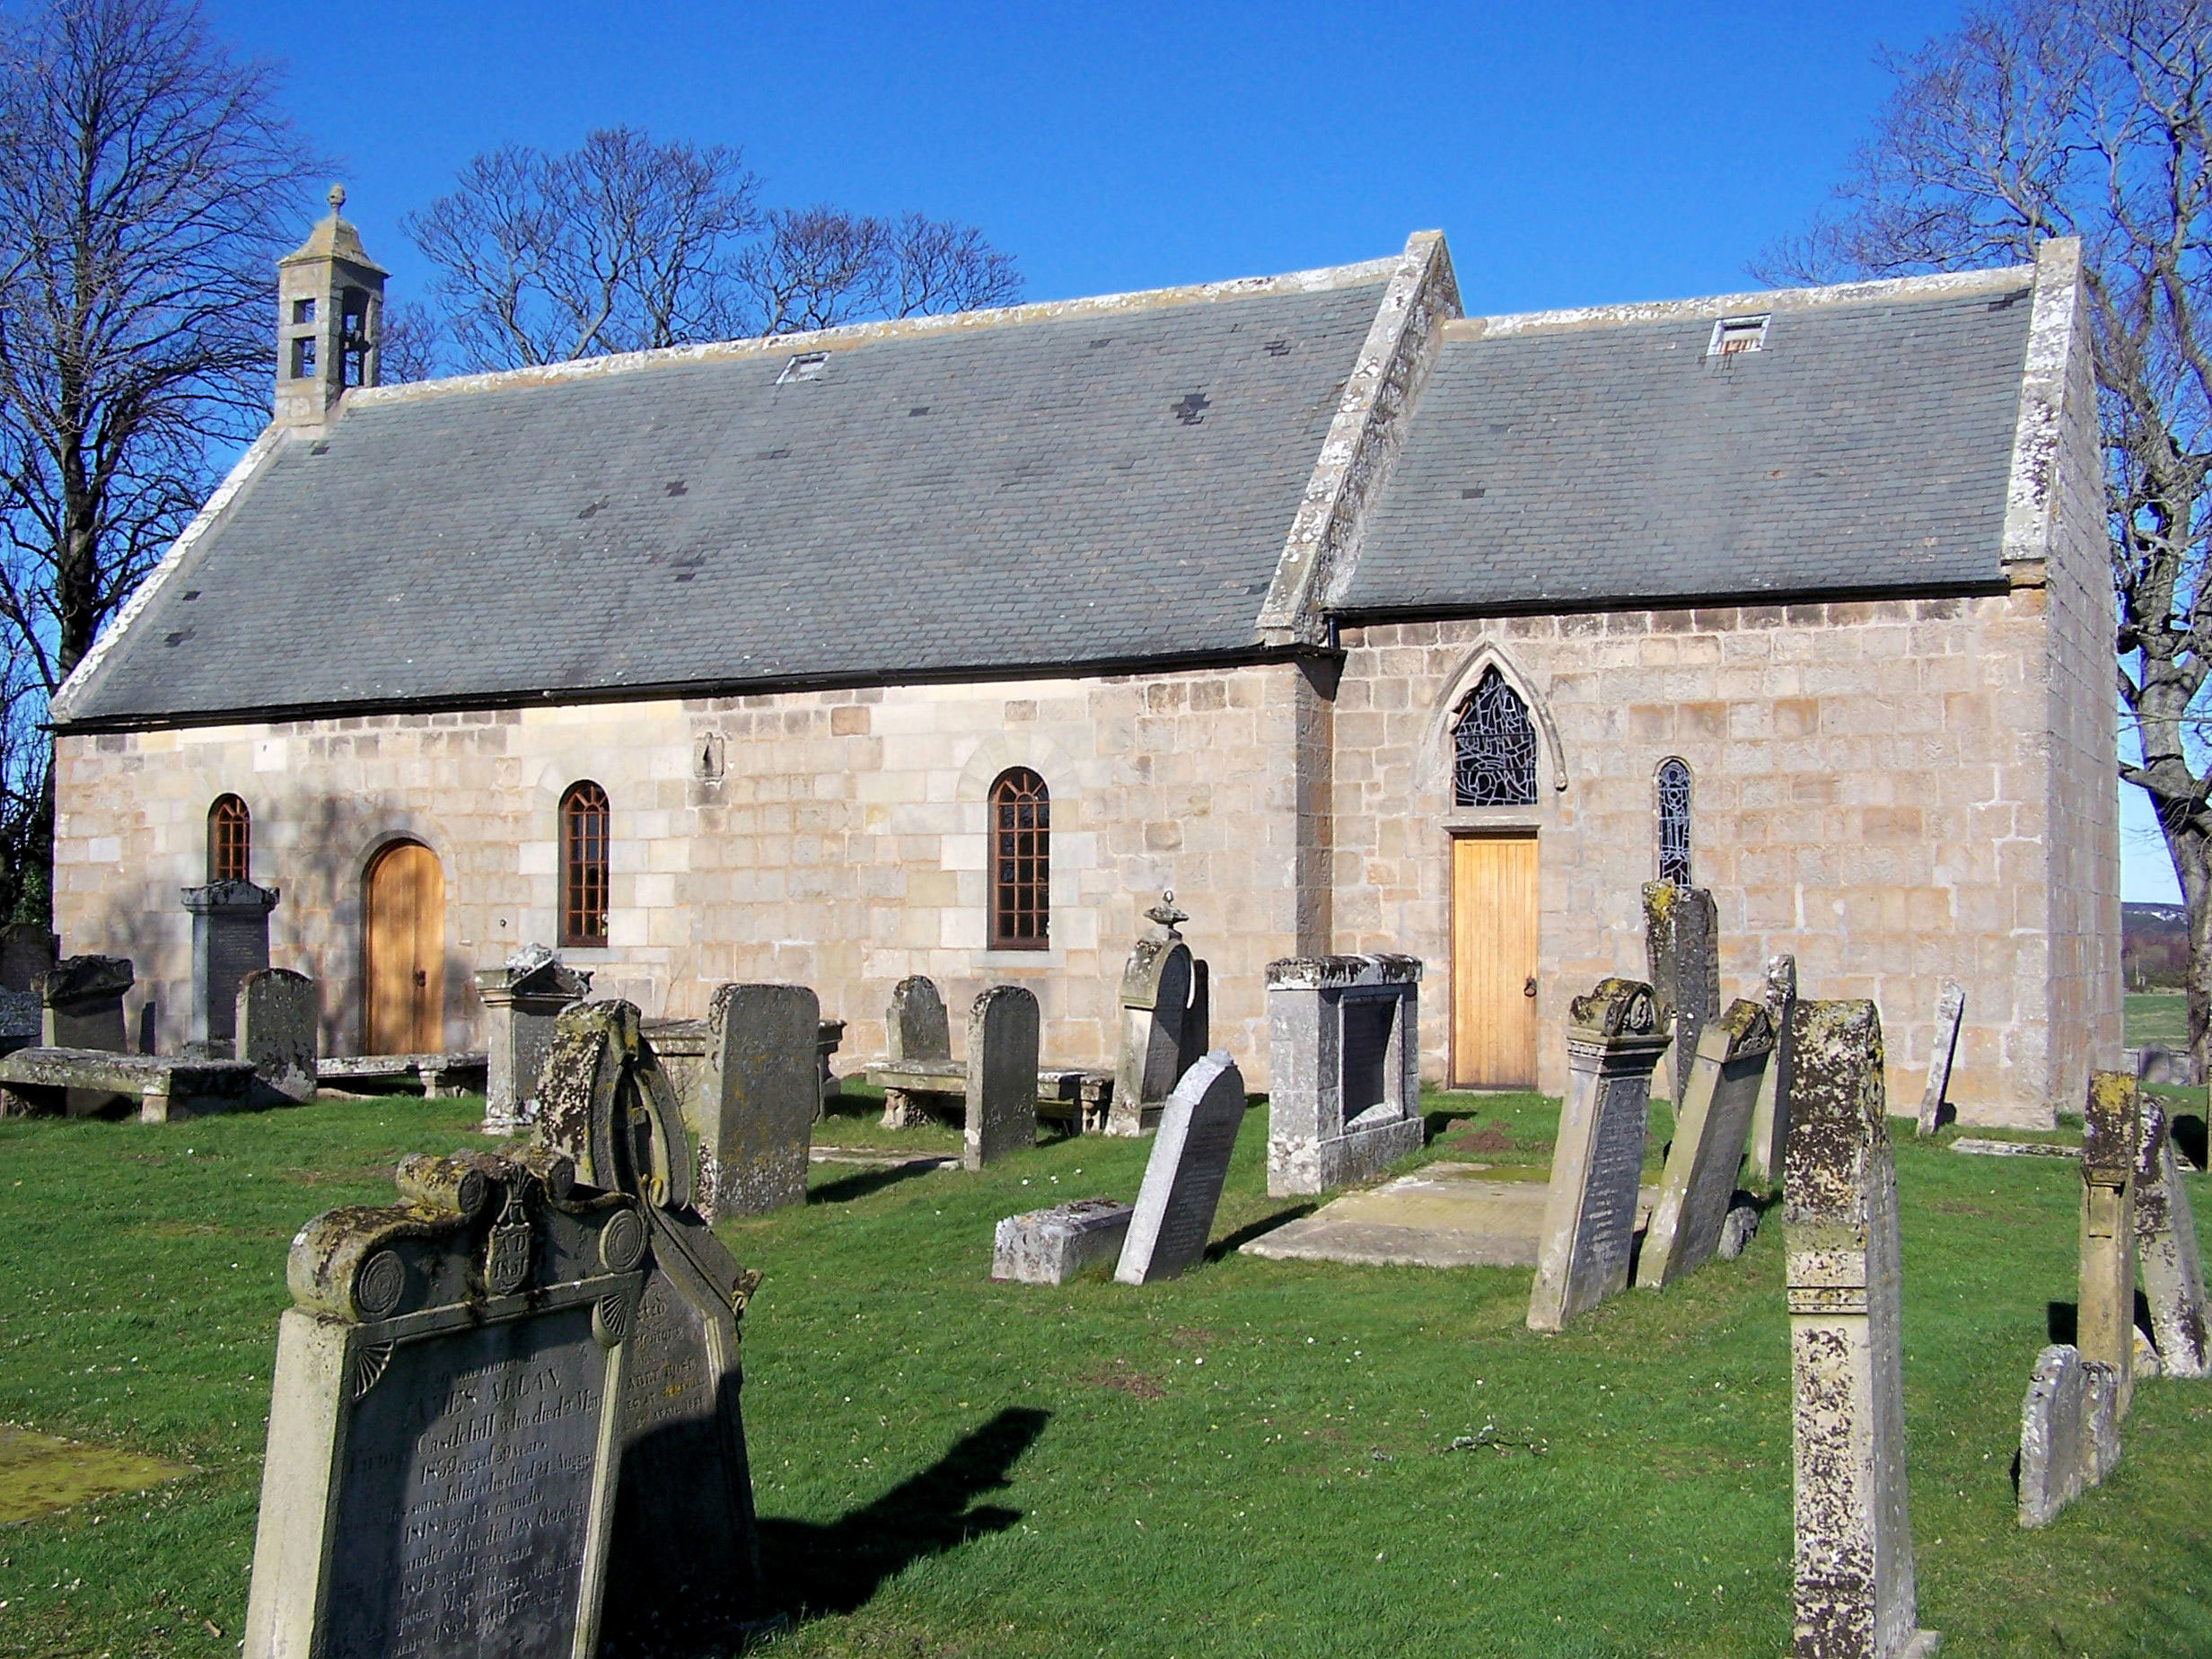 After 833 years of service, ancient church in Scotland has final mass